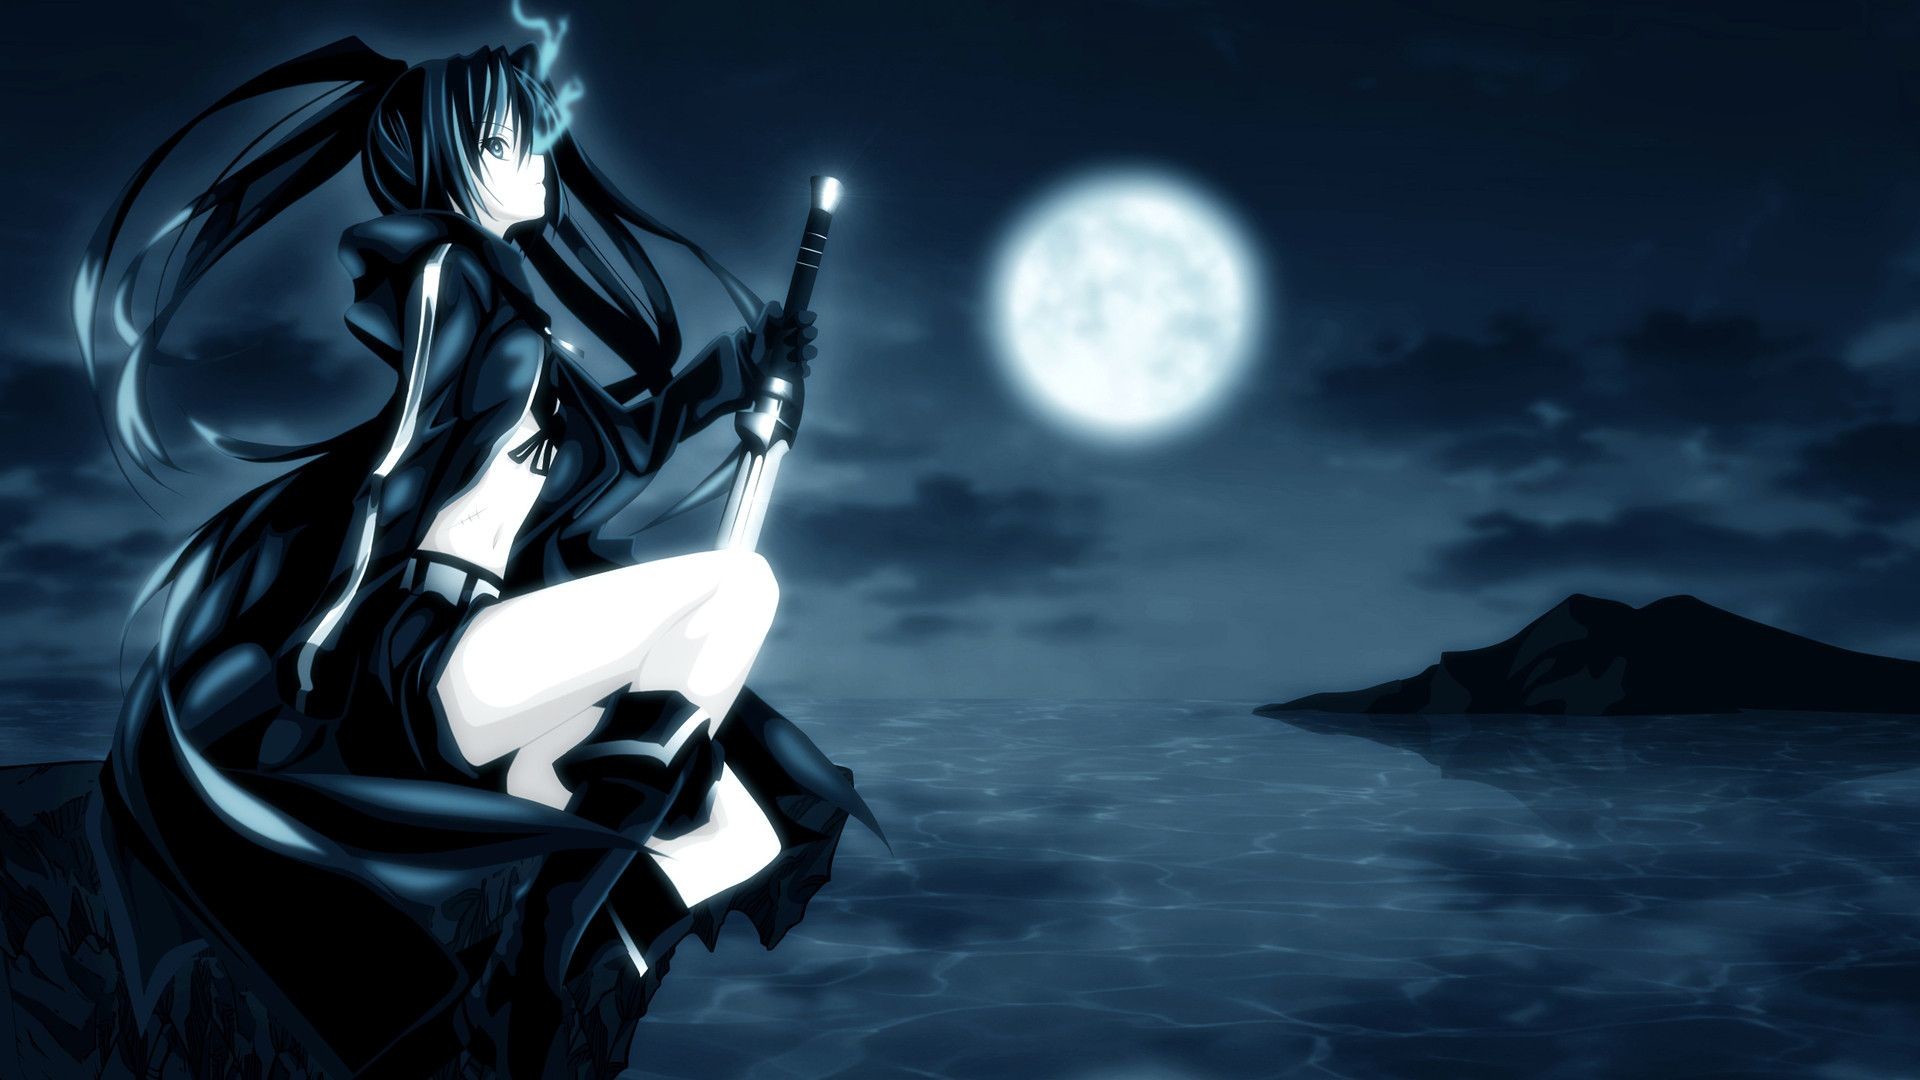 1920x1080 Cool Anime Wallpapers HD  - HD Wallpapers Backgrounds of ... src